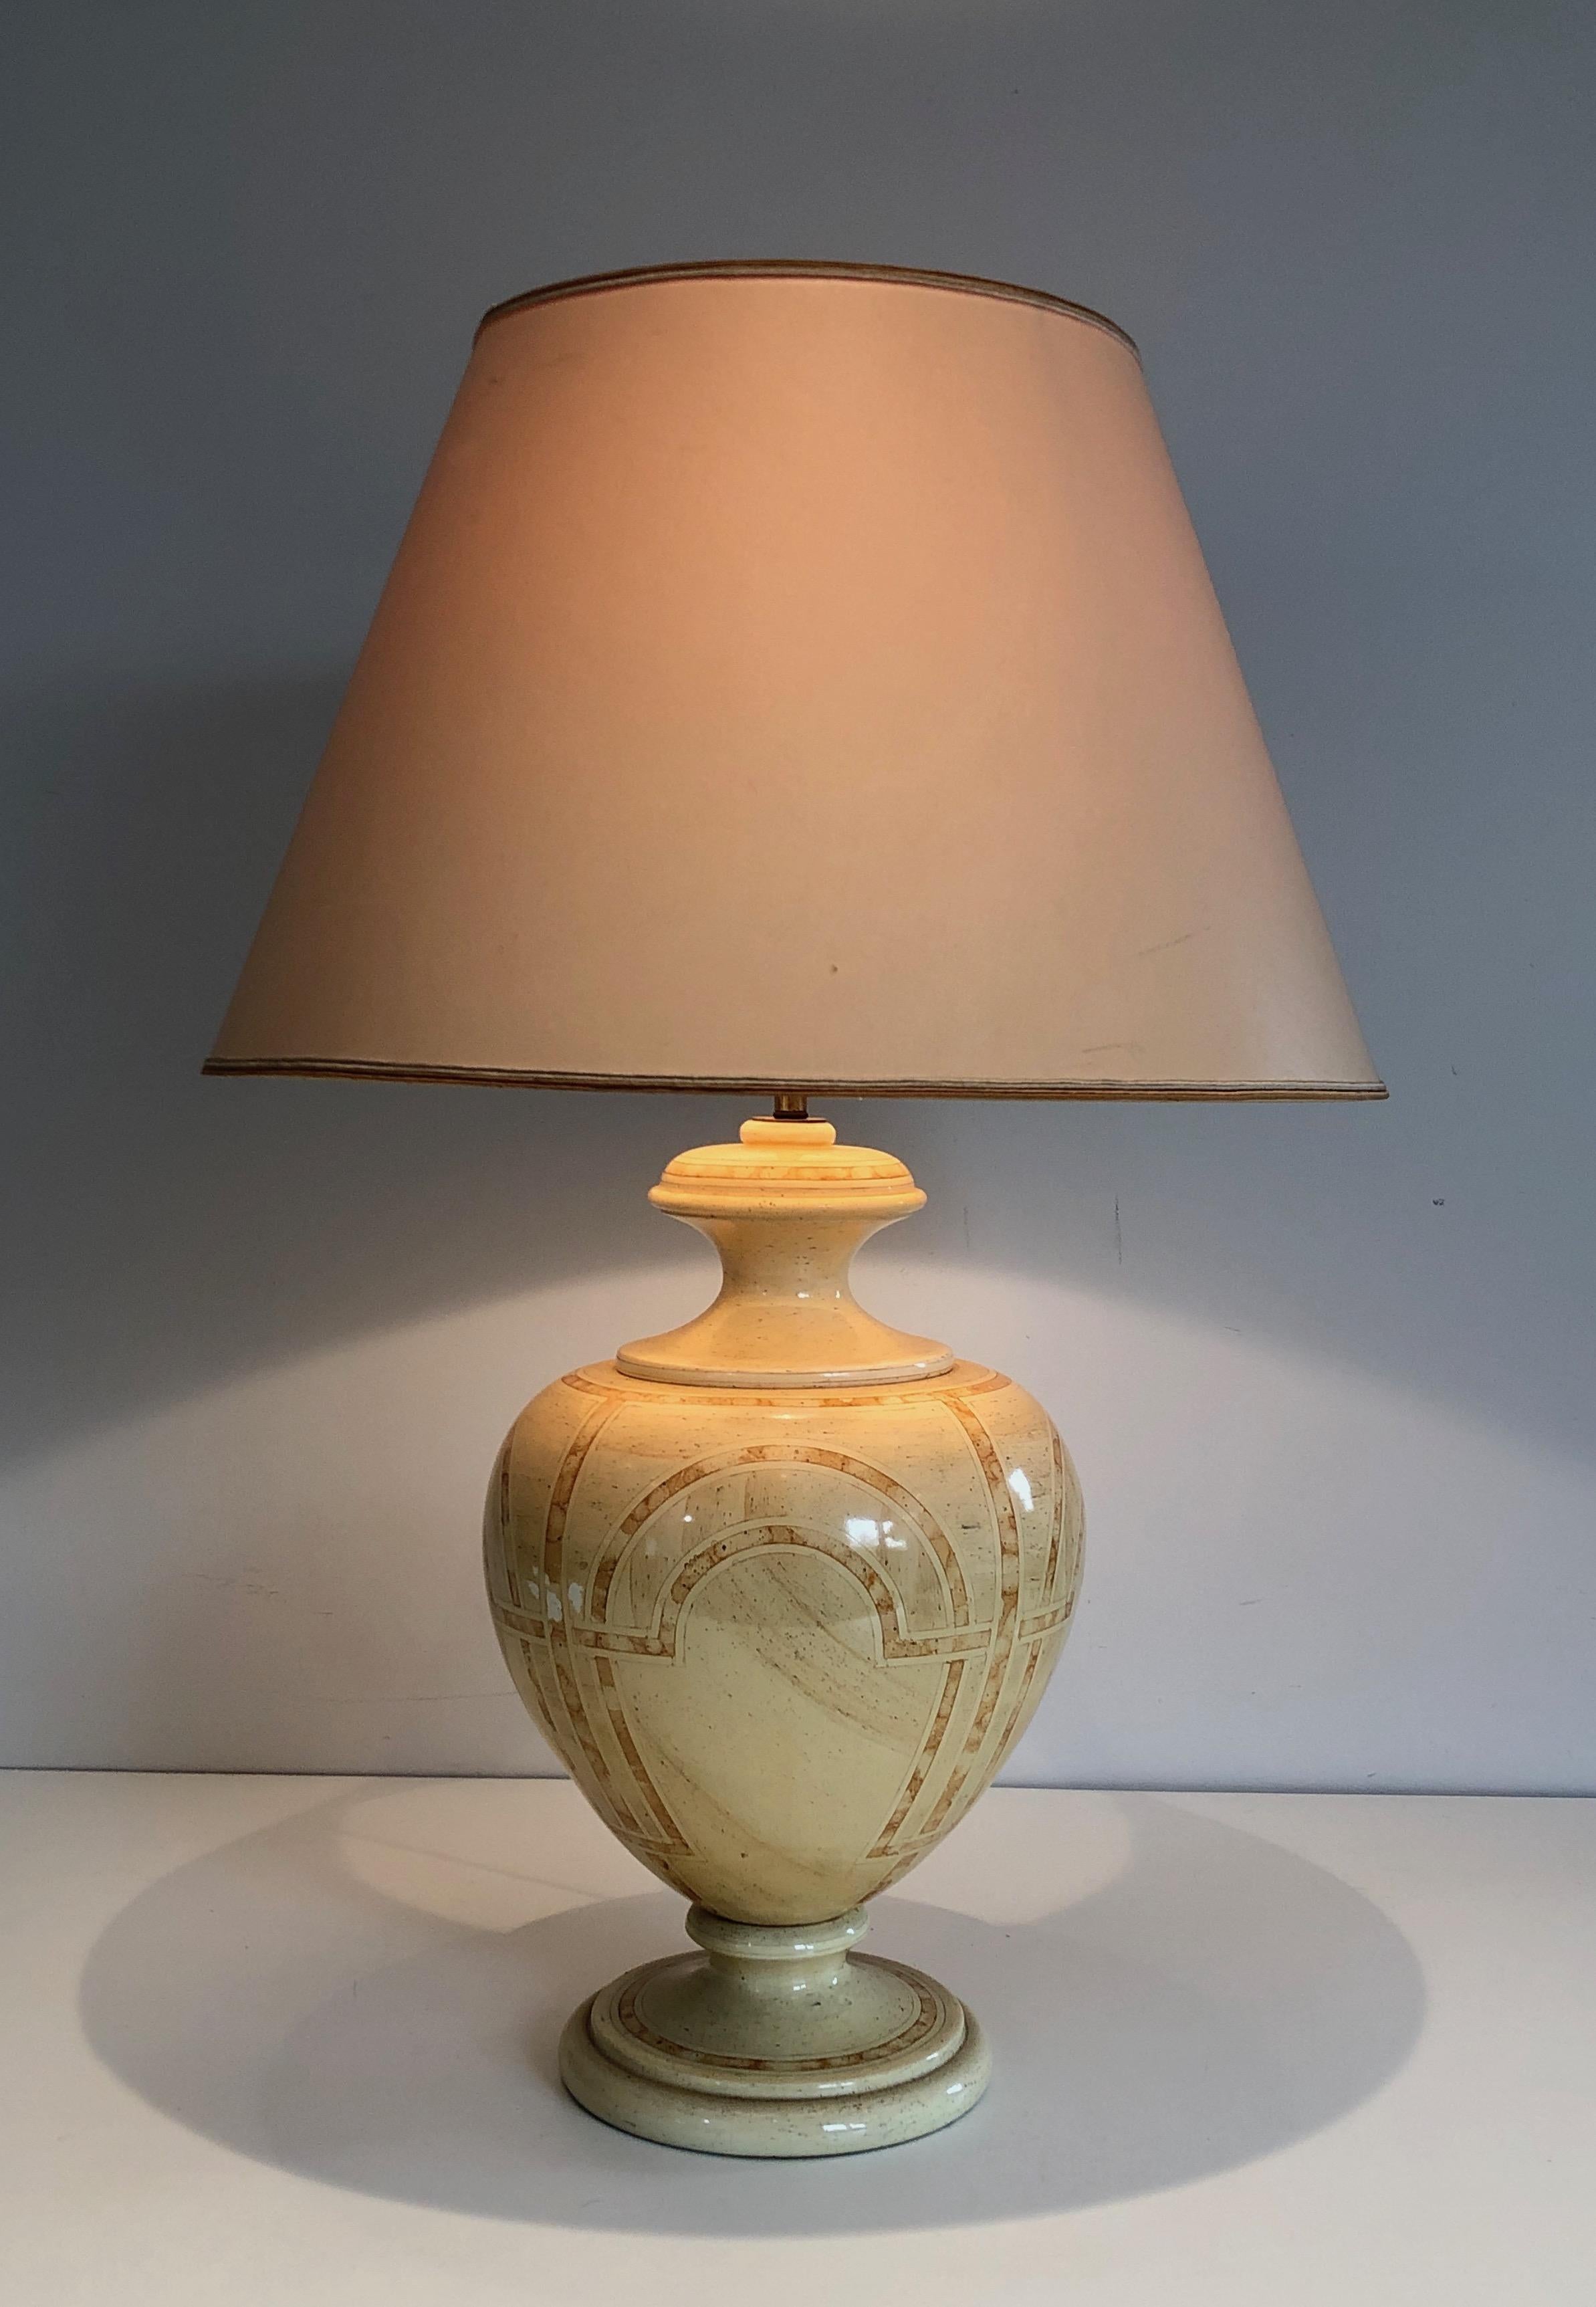 Eggshell Lacquered Table Lamp with Interlacing Decors, French Work, circa 1970 For Sale 14